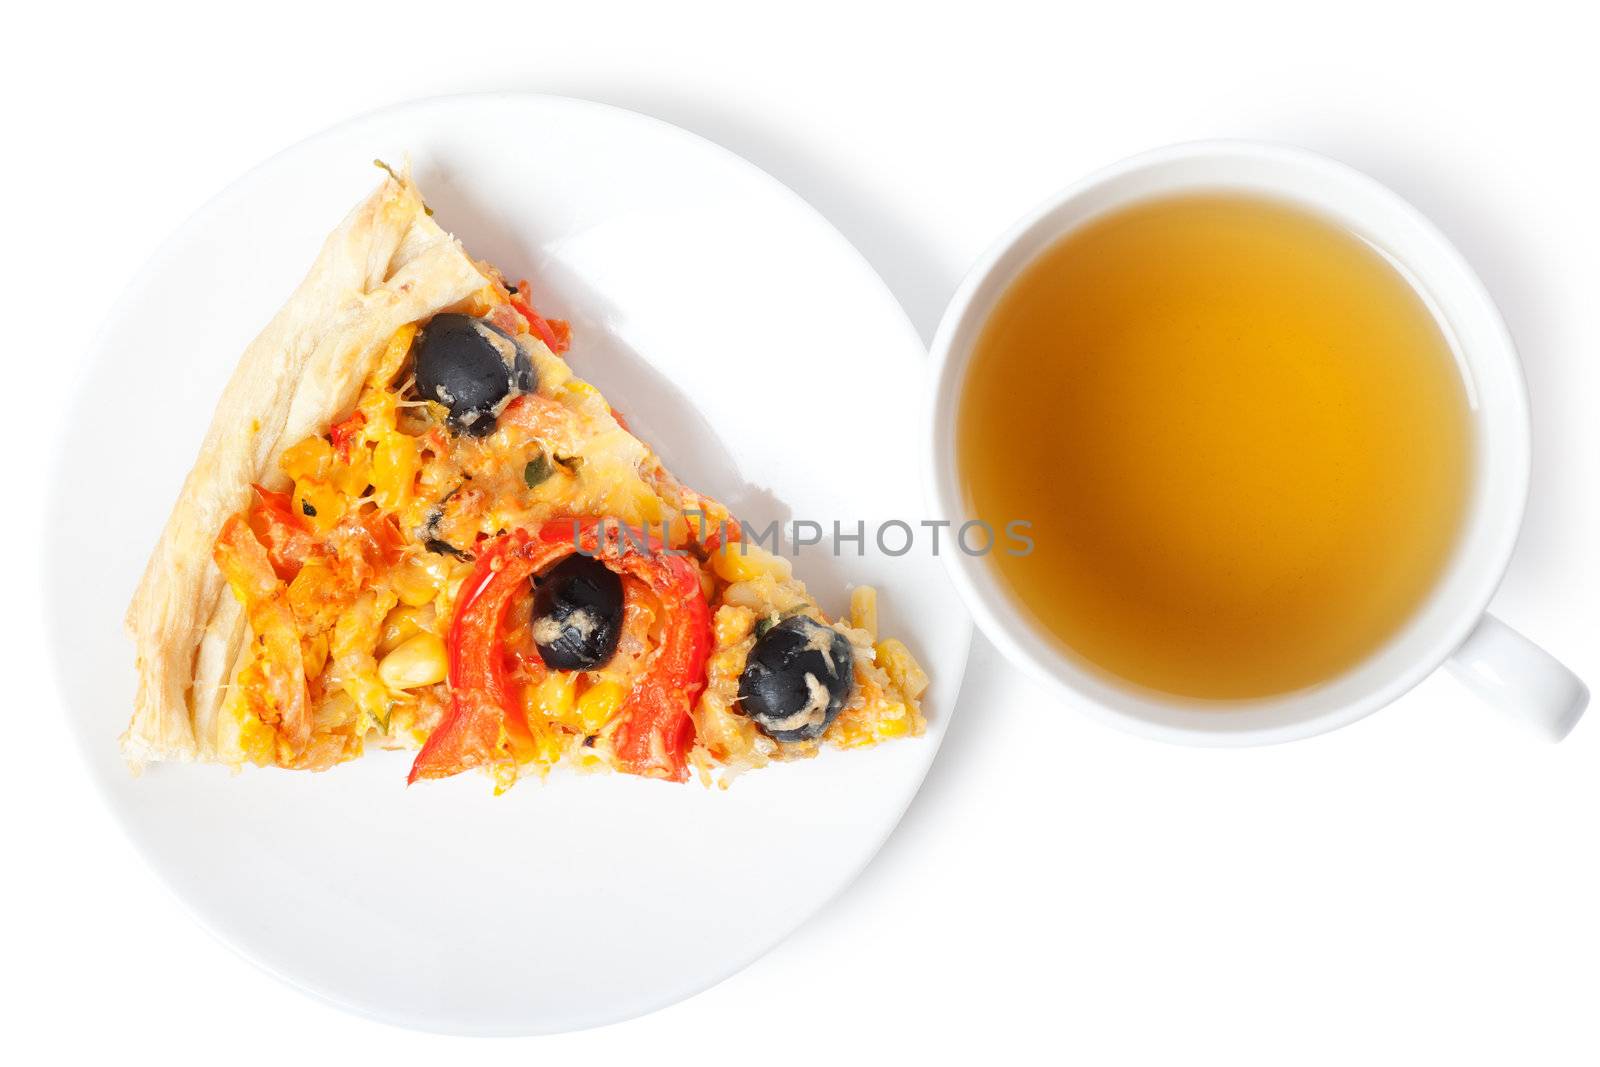 A slice of pizza on a plate and a cup of tea